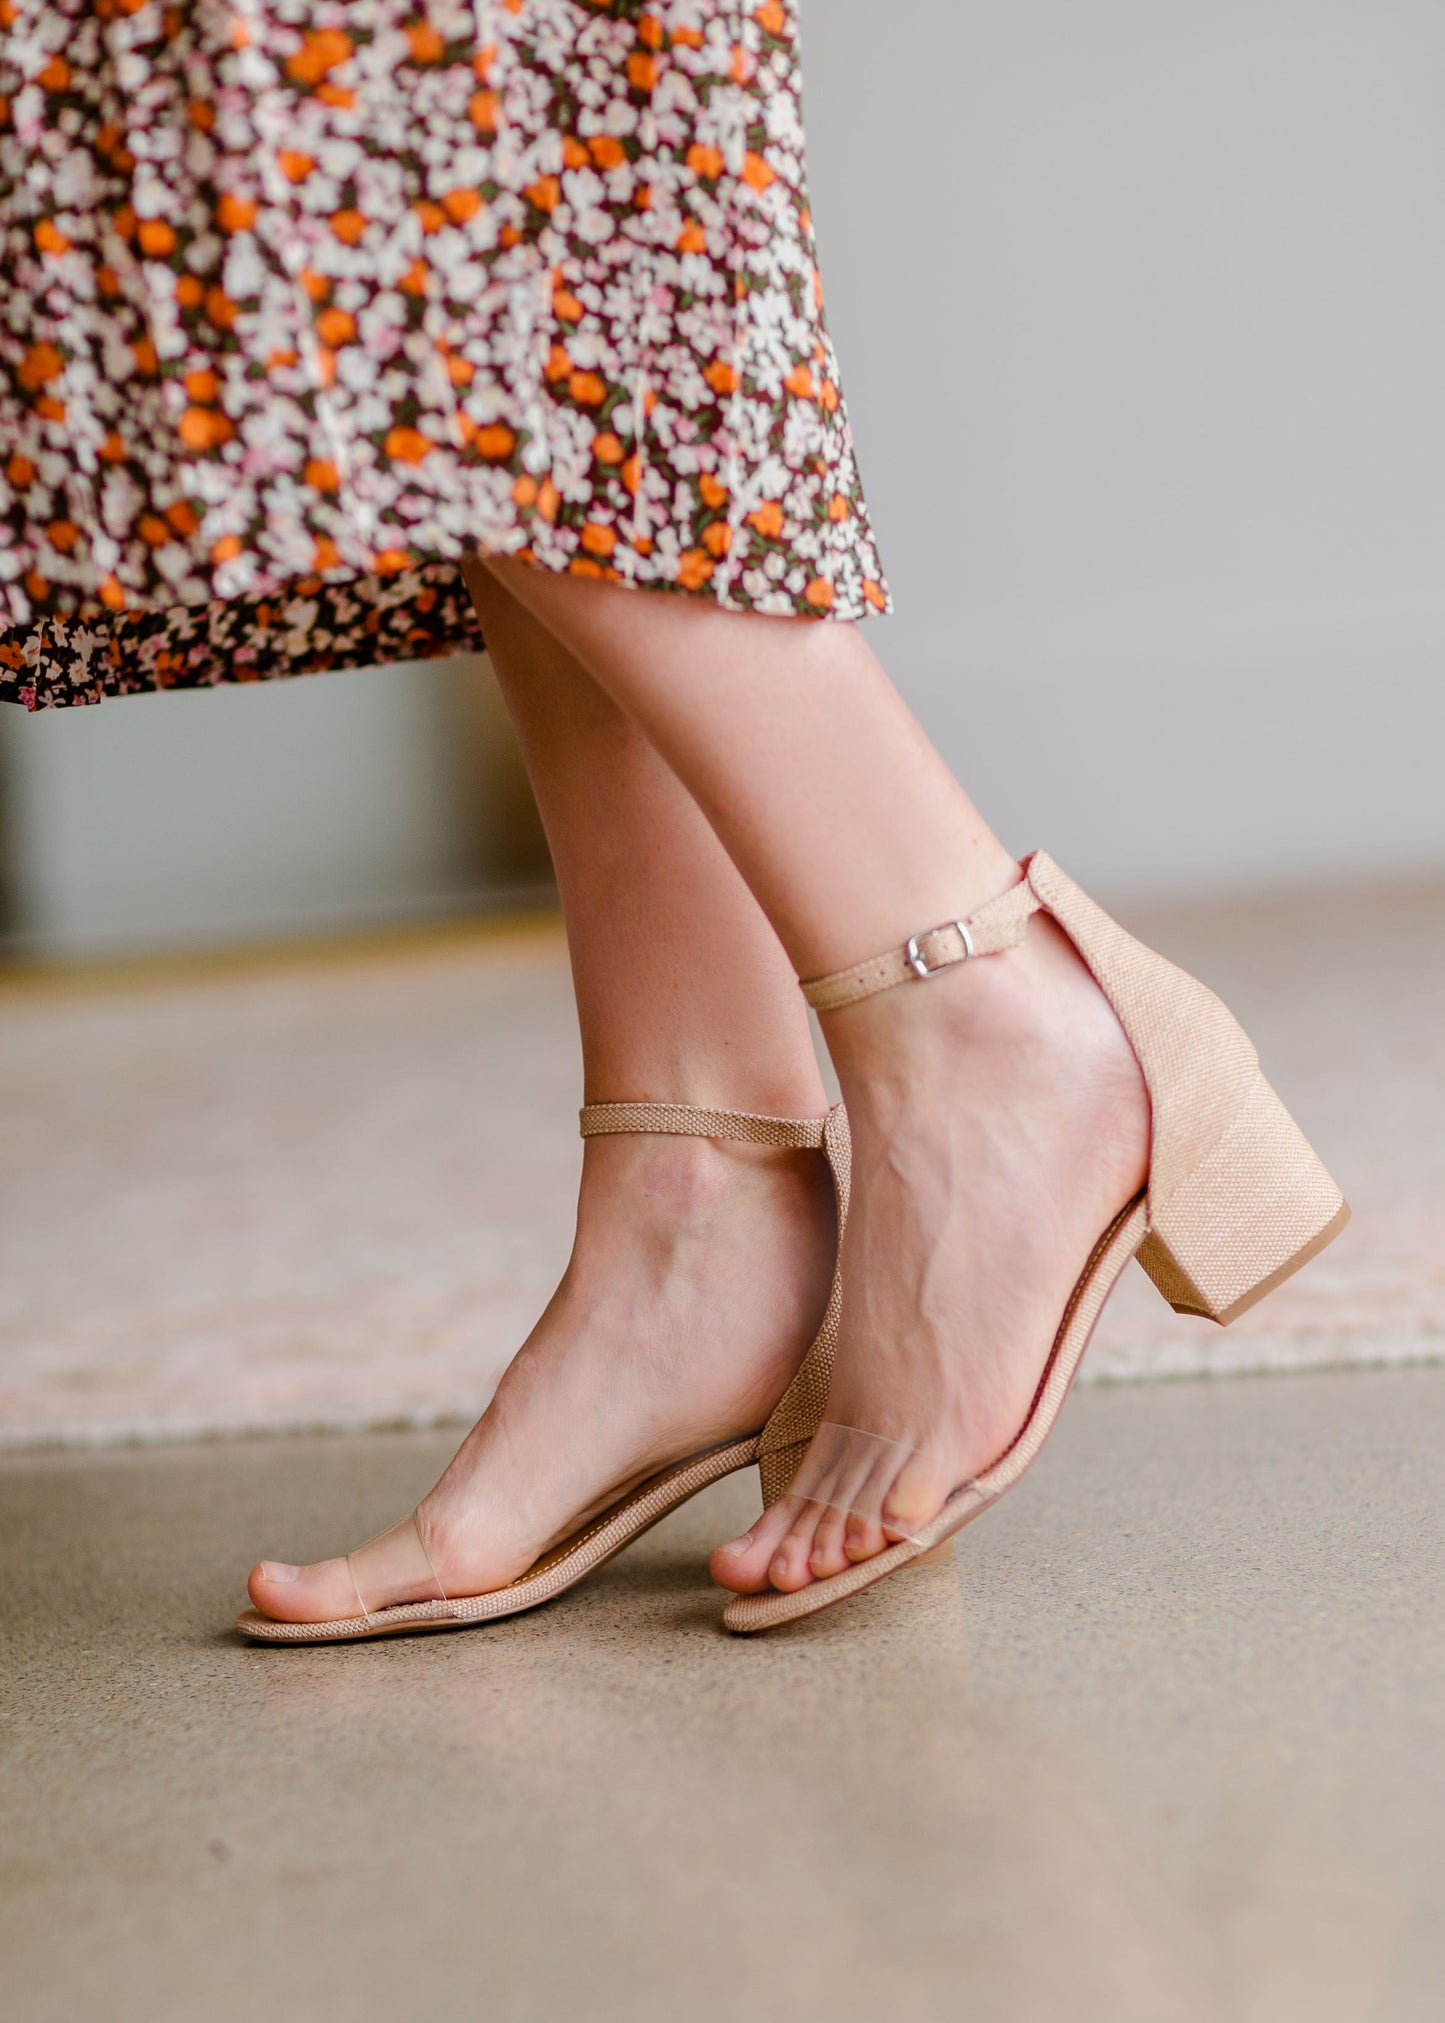 Embrace the warm weather with the Steve Madden Irenee Ankle Wrap Block Heel! It features a trendy, clear toe strap and block heel. This sandal will take any outfit to the next level with it's neutral tones and look!